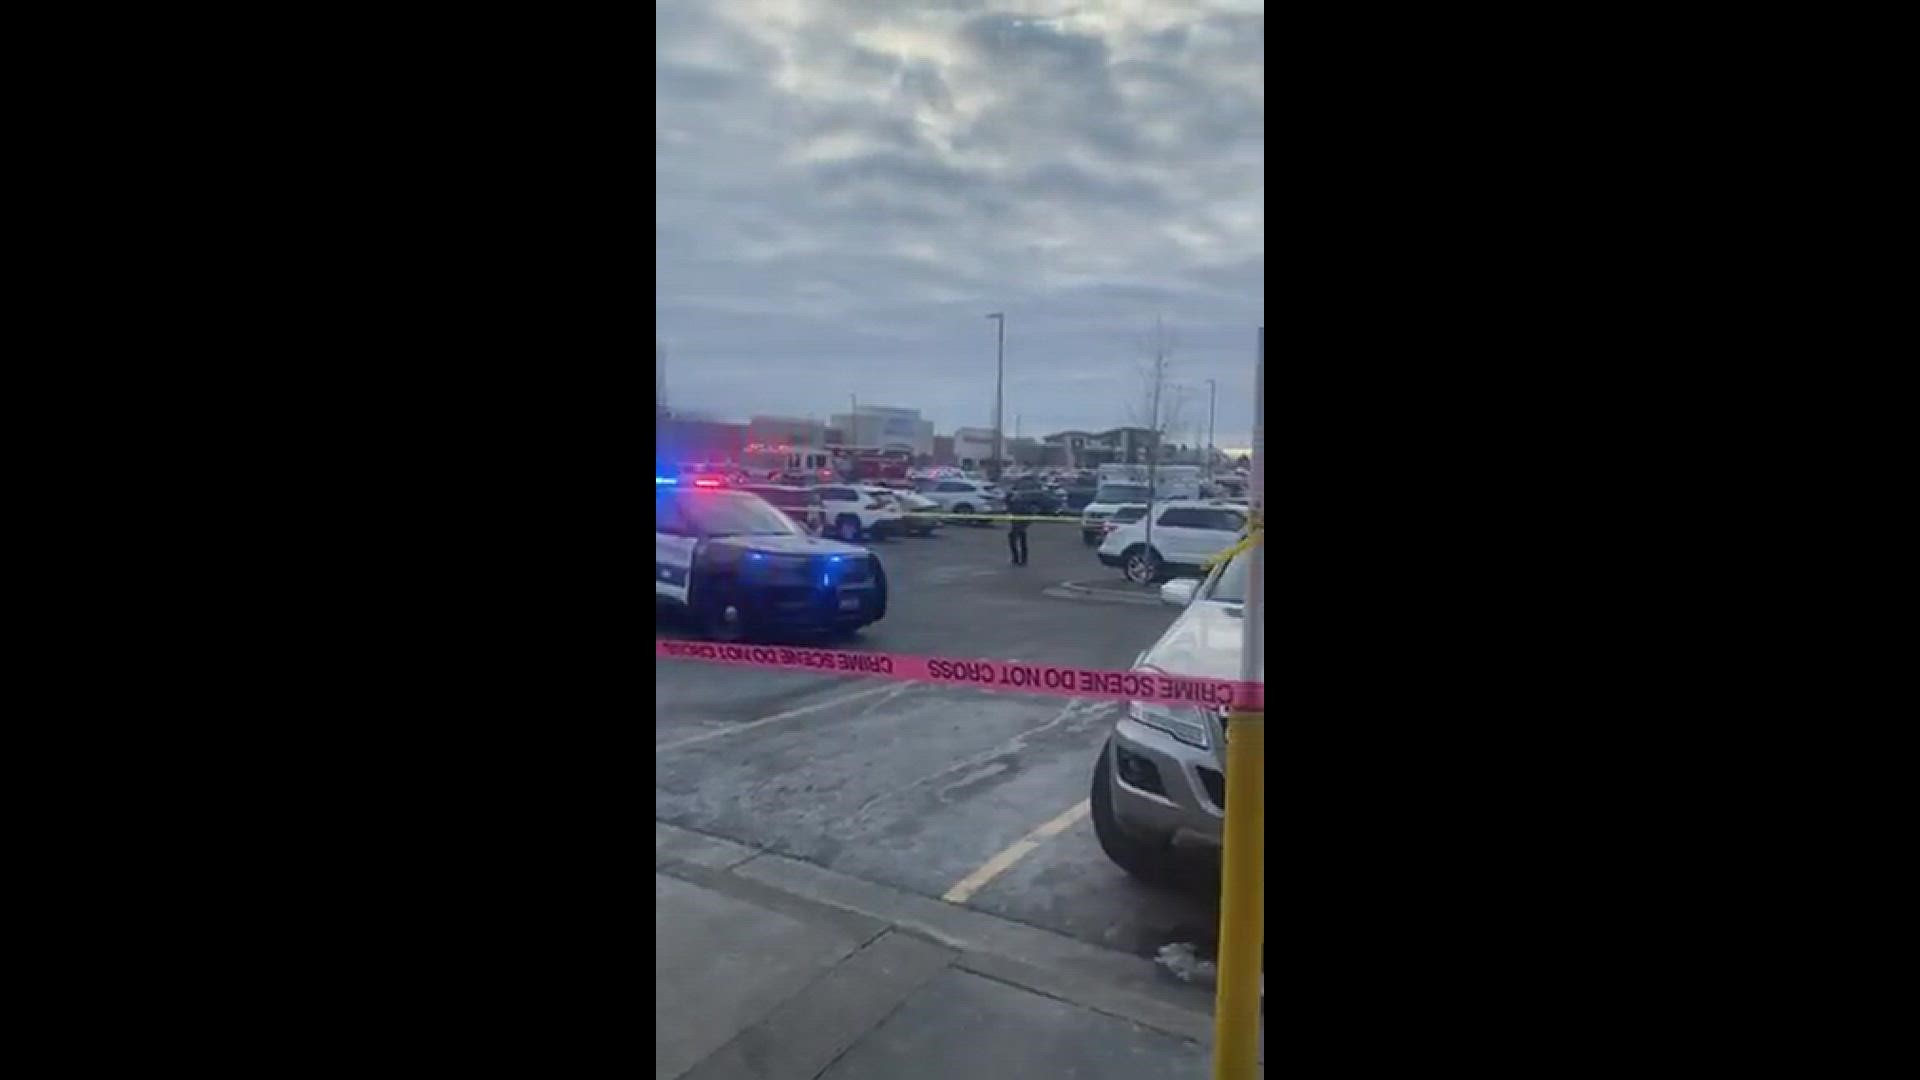 Officer-involved shooting at Texas Roadhouse parking lot
Credit: Dan Iverson